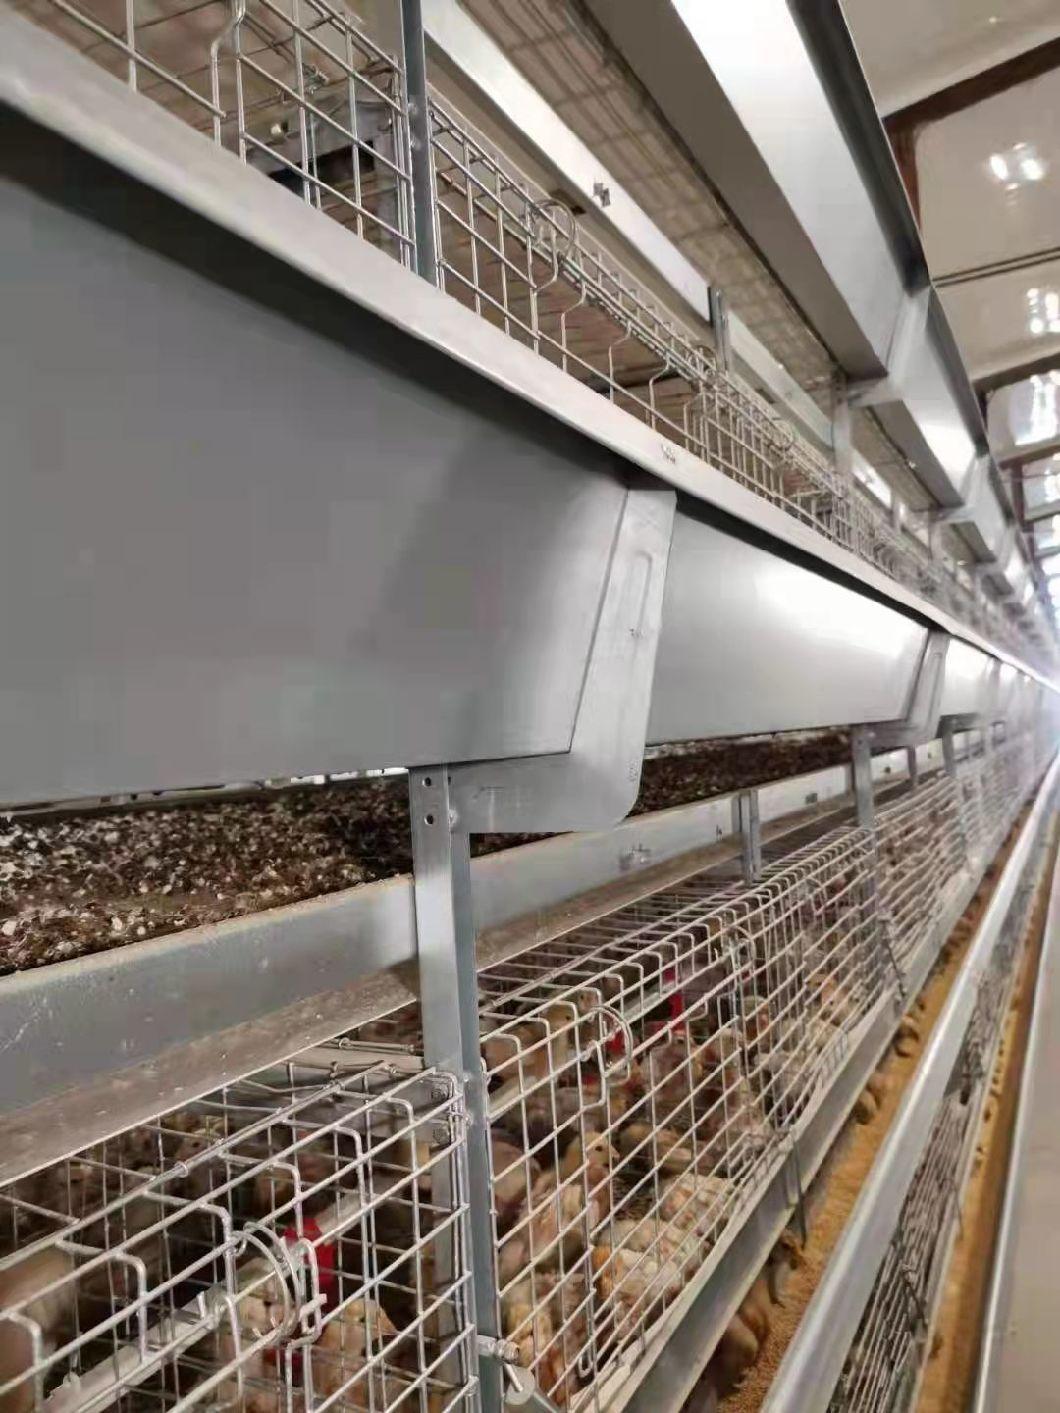 High Quality Metal Baby Chicken Cage 4 Layer H Type, Poultry Farm Baby Chick Brooder Cage